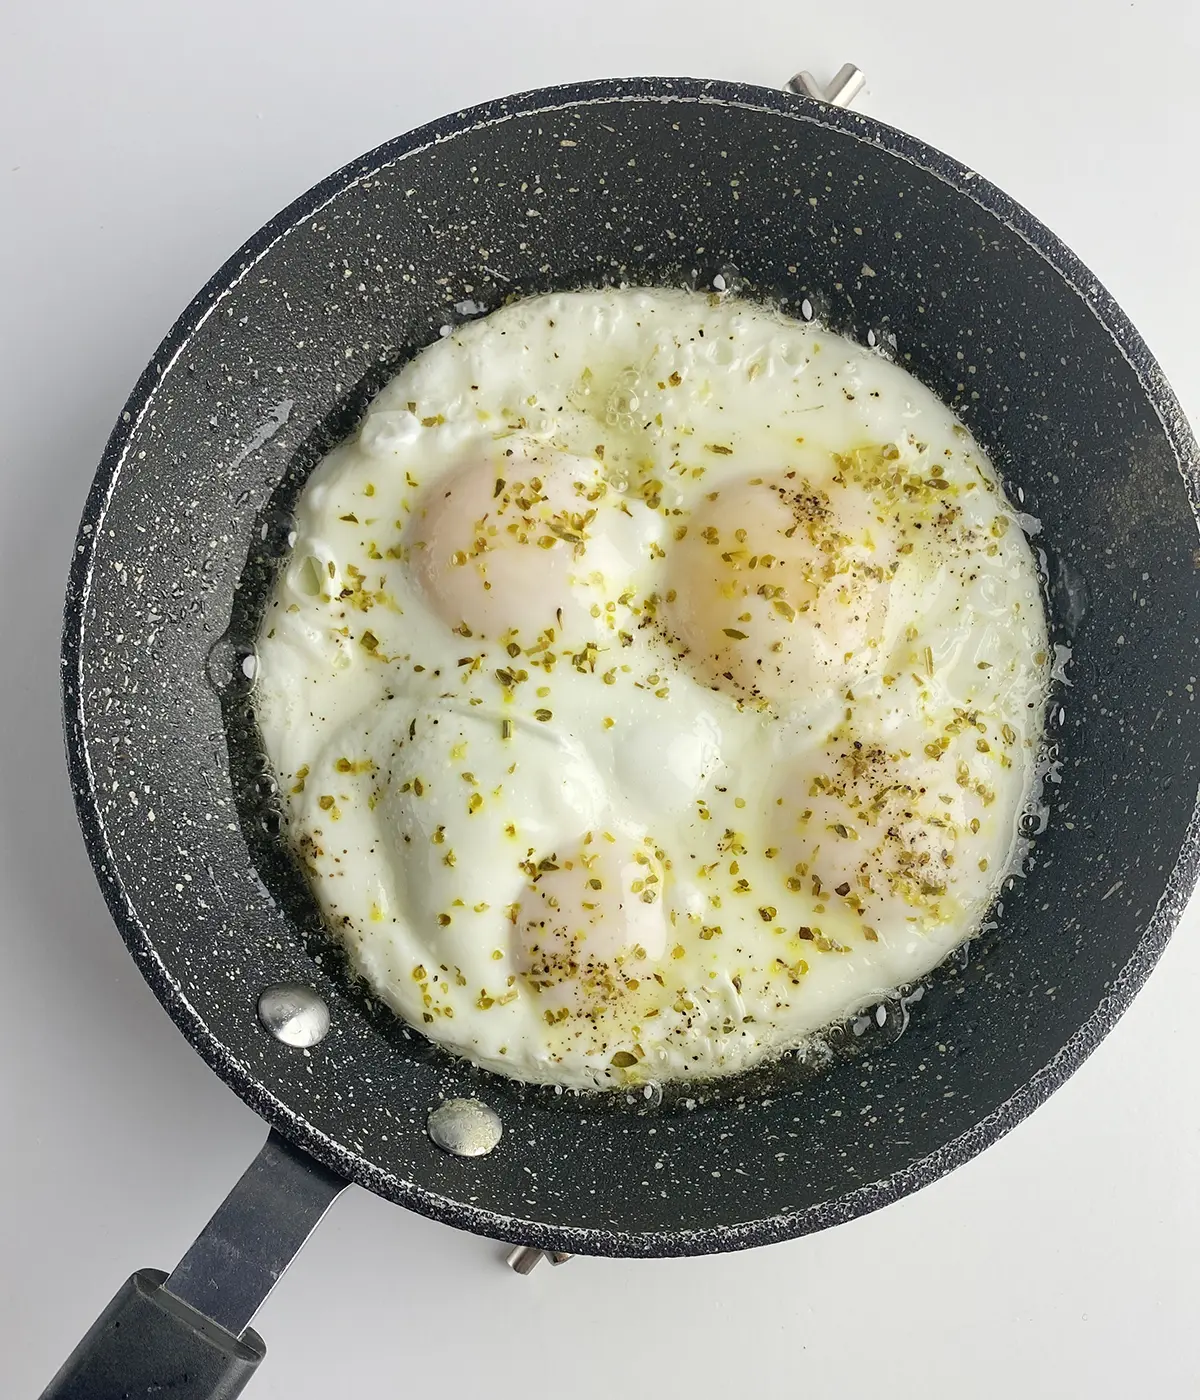 https://www.framedcooks.com/wp-content/uploads/2015/09/Perfect-fried-eggs-cooked-in-a-skillet.jpg.webp